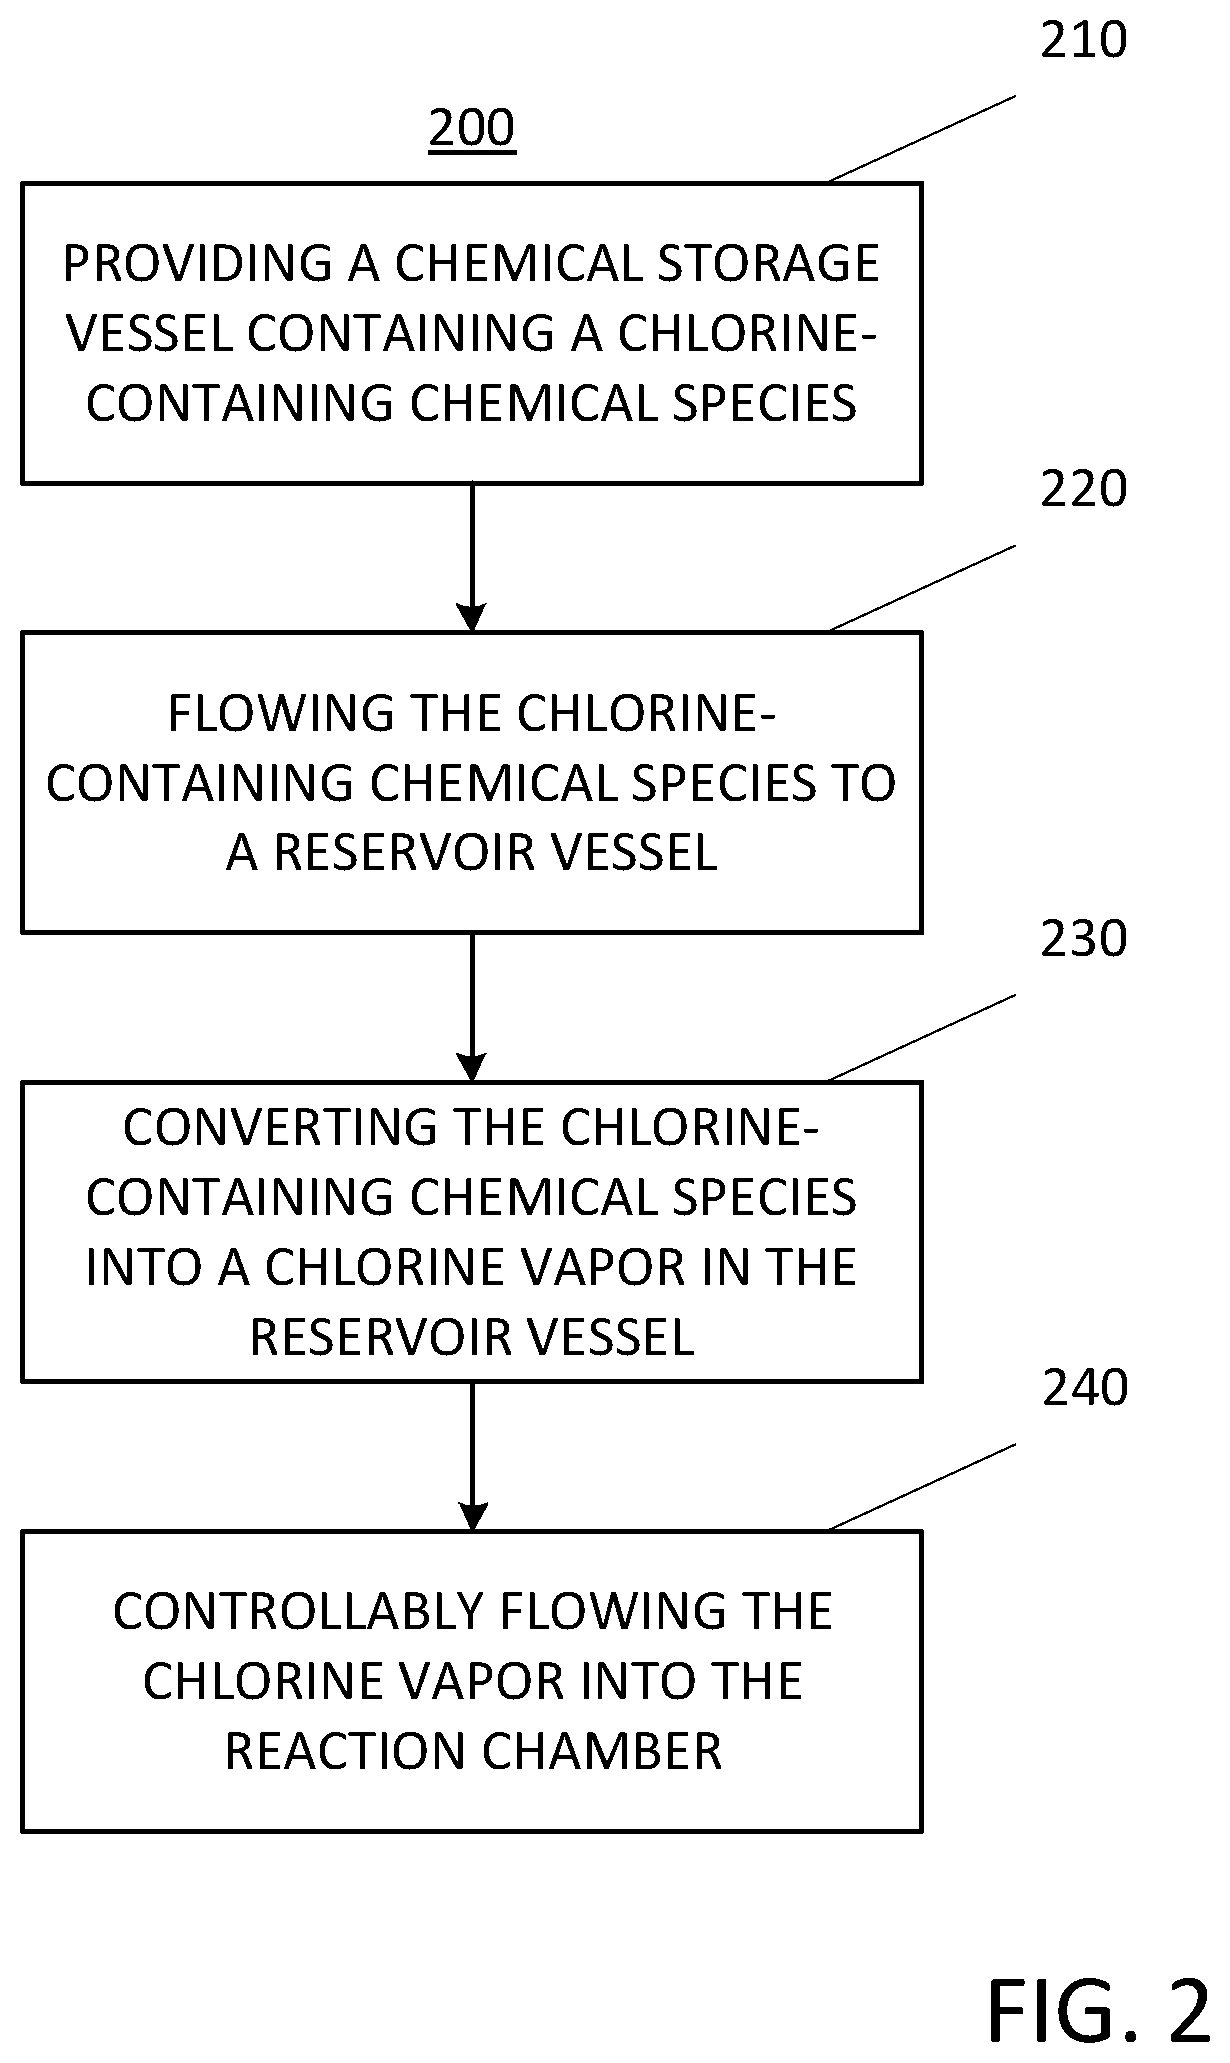 Chemical dispensing apparatus and methods for dispensing a chemical to a reaction chamber